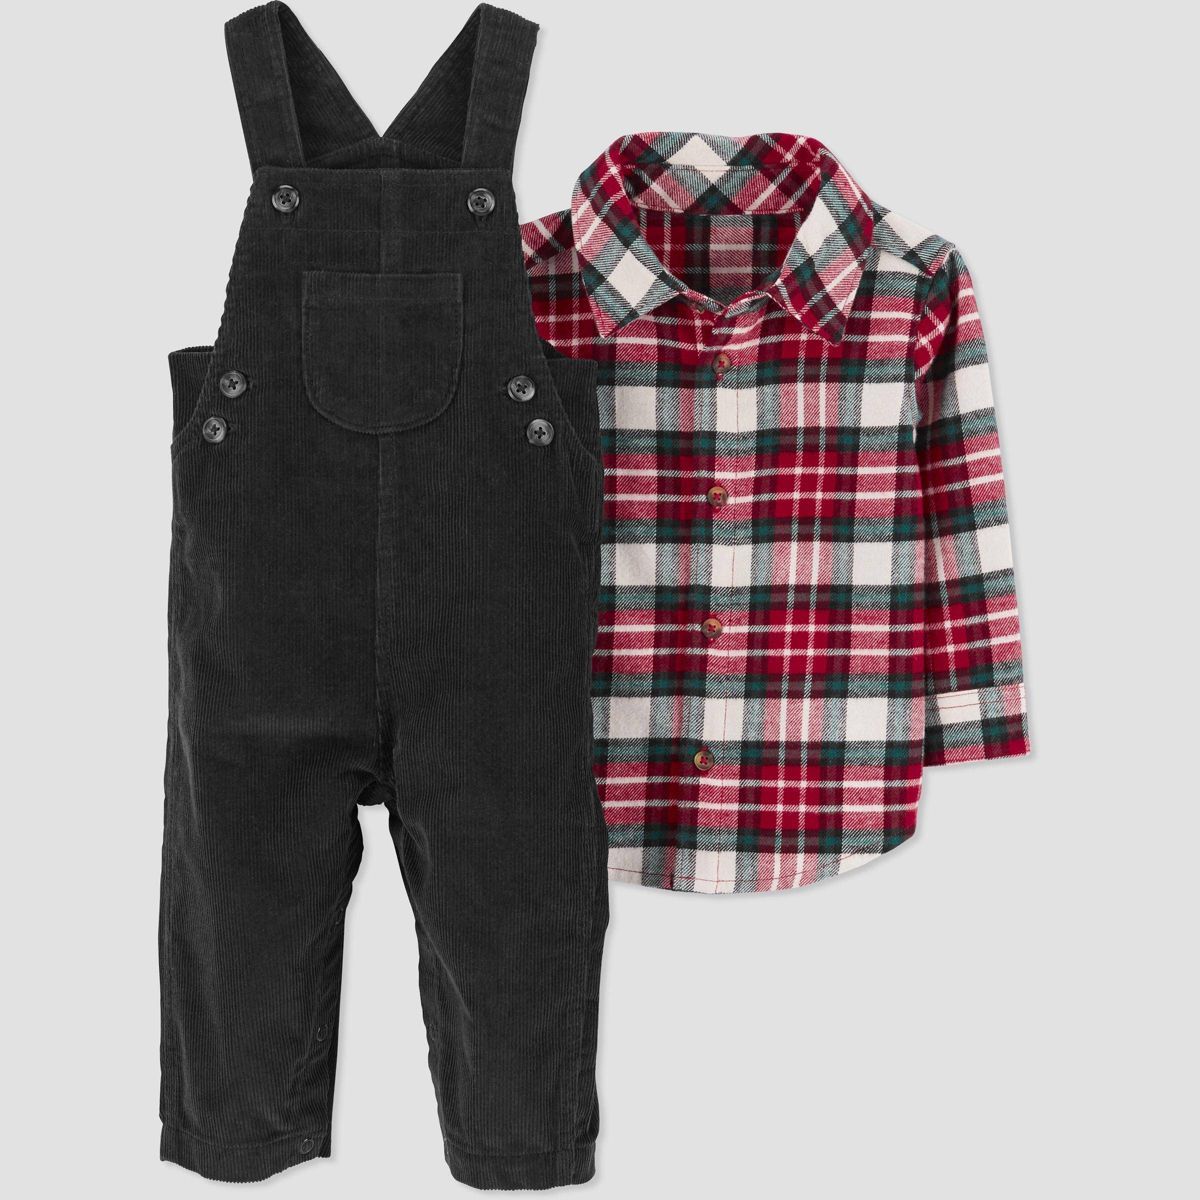 Carter's Just One You®️ Baby Boys' Plaid Top & Overalls Set - Green/Red | Target